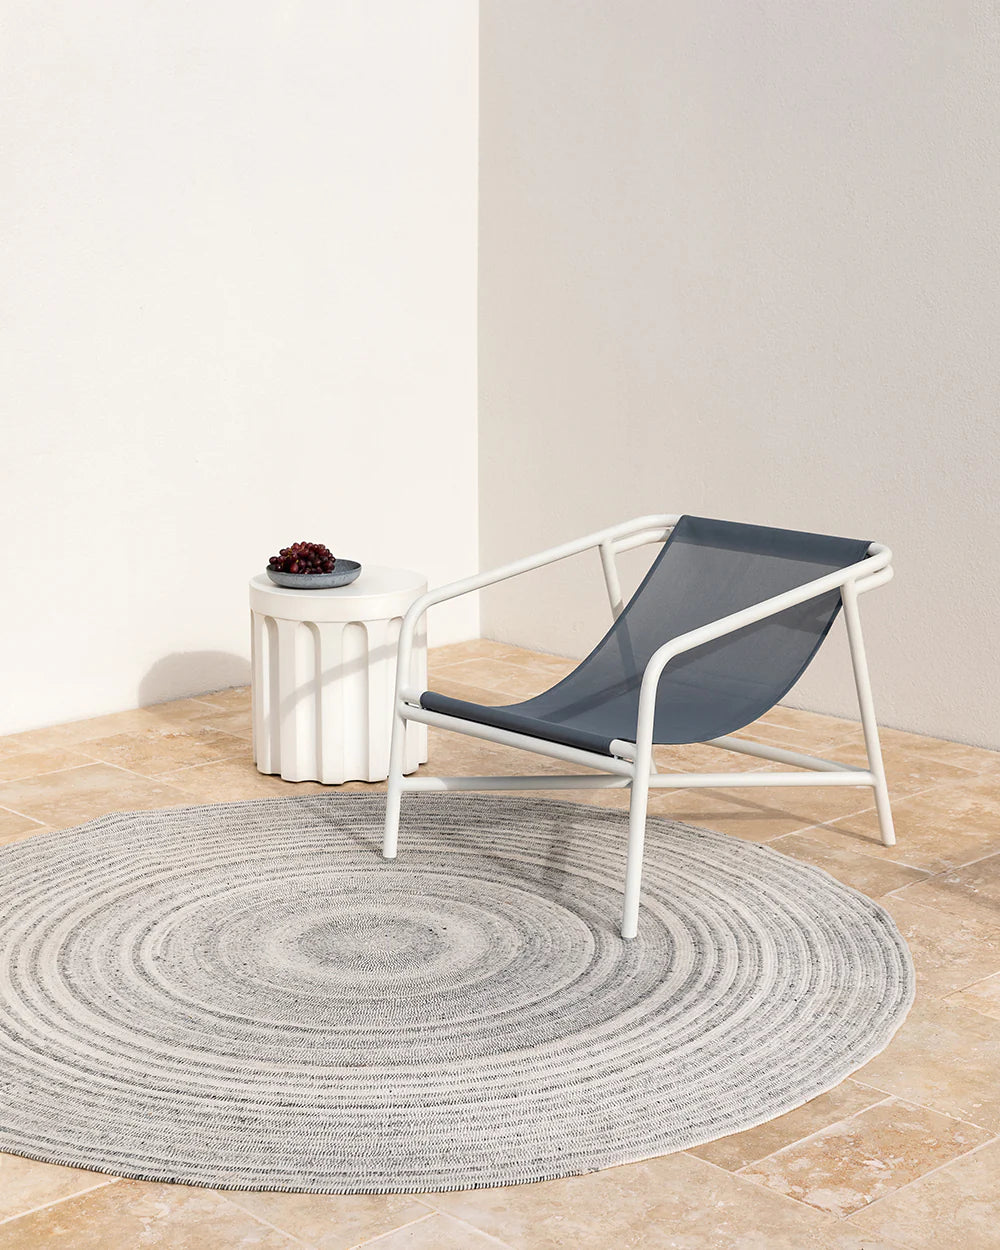 Palm Cove Pumice Outdoor PET Rug from Baya Furtex Stockist Make Your House A Home, Furniture Store Bendigo. Free Australia Wide Delivery.